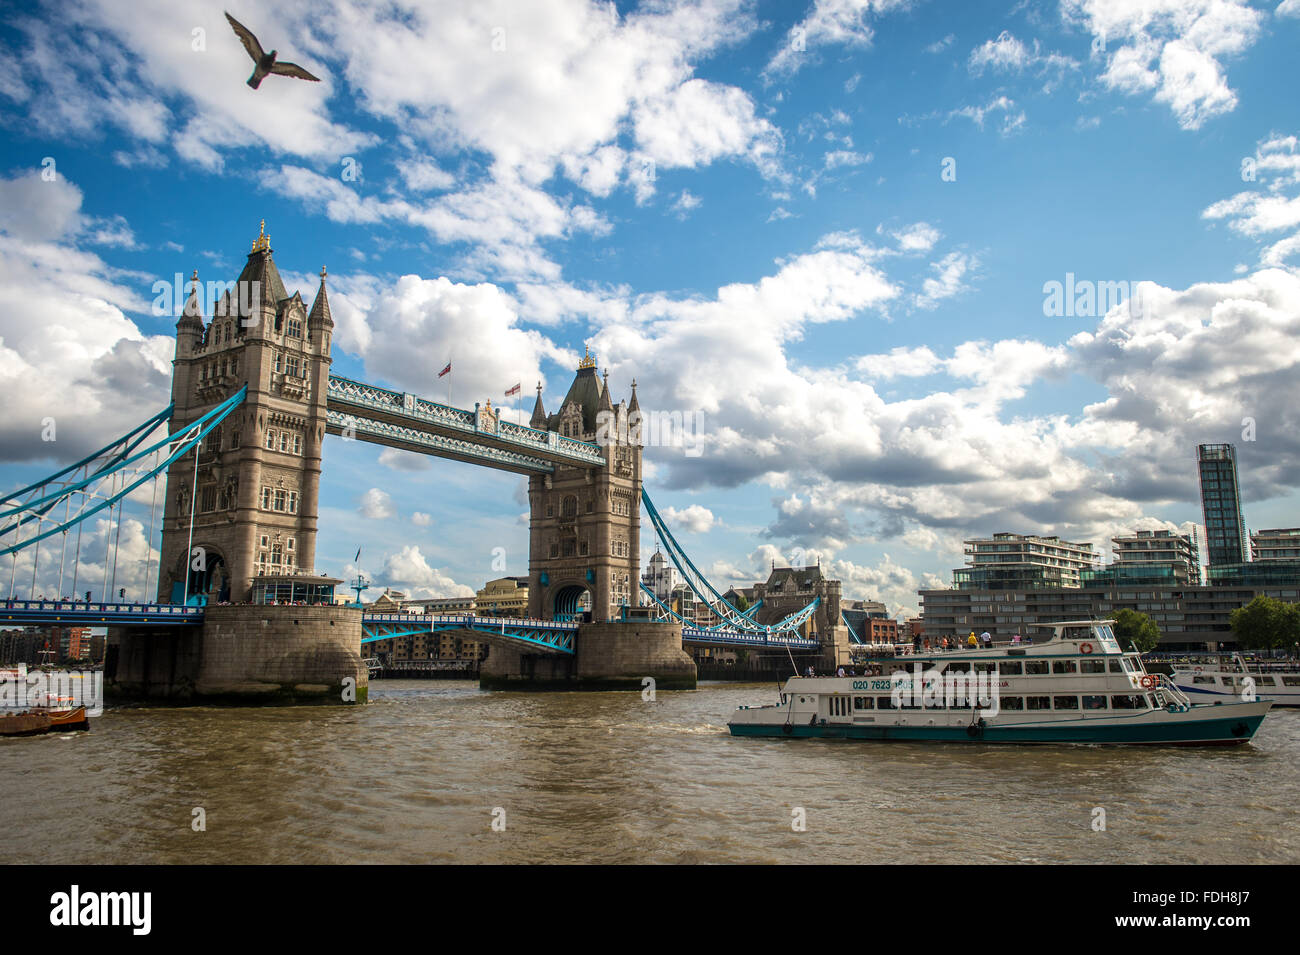 Boats passing by the Tower Bridge on the River Thames in London, England. Stock Photo